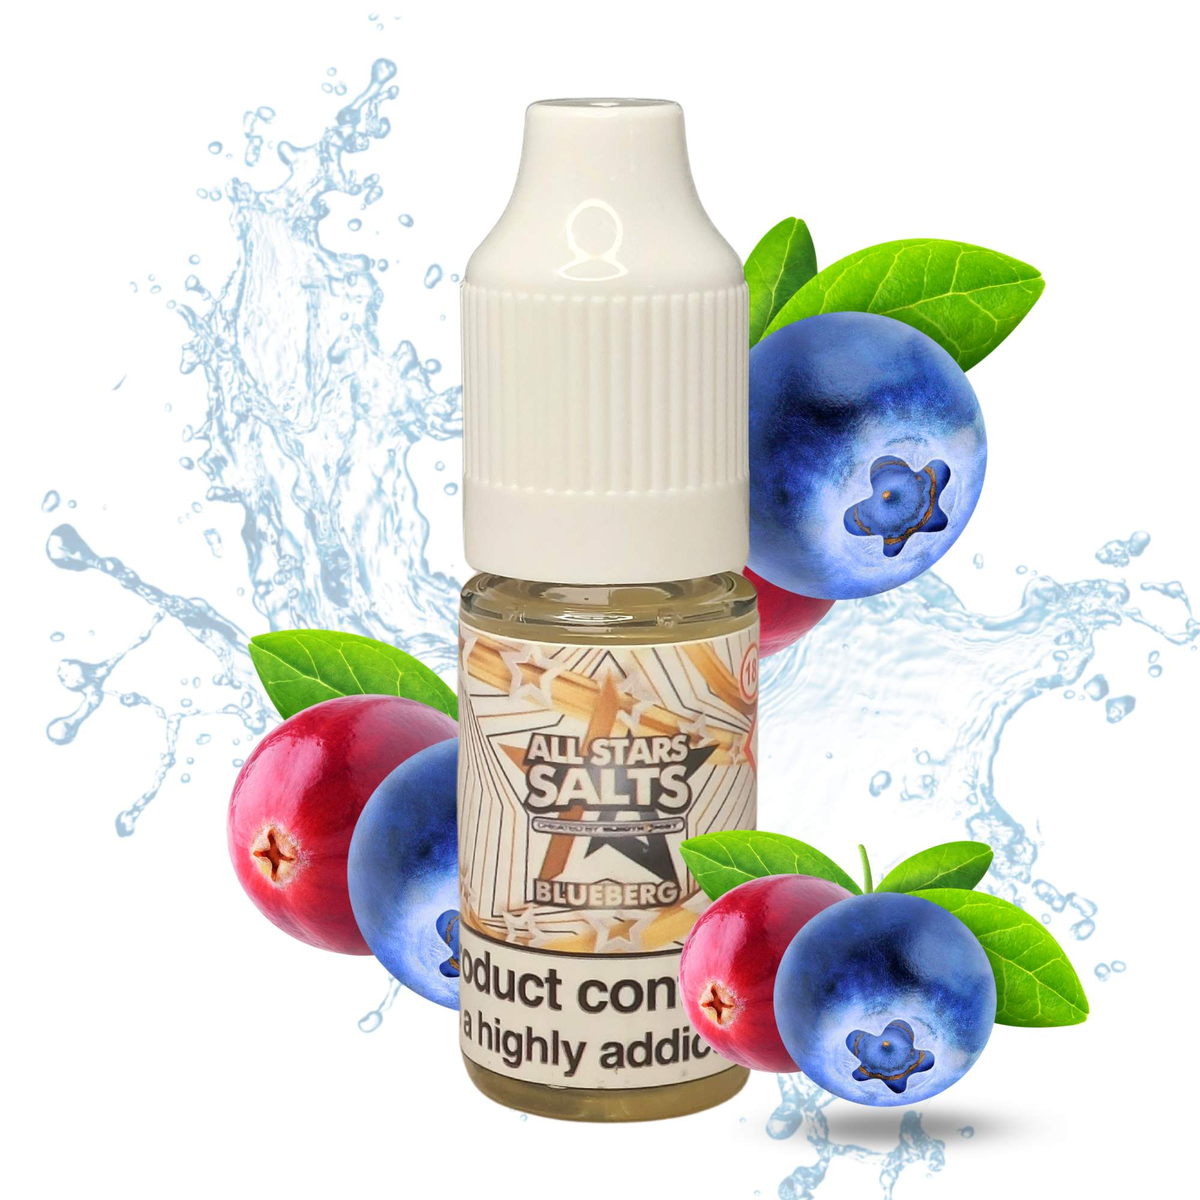 All Stars Salts from the vape brand you can trust, Electromist, . Get your taste buds ready for a flavour sensation, Blueberg. Nicotine Content: 6mg/12mg/18mg Products may contain nicotine. For over 18s Only ejuice, vape pen, eliquid, e cigarette, 10ml, vaping, cloud, PG, VG, 60/40, vape liquid, Flavour, TPD